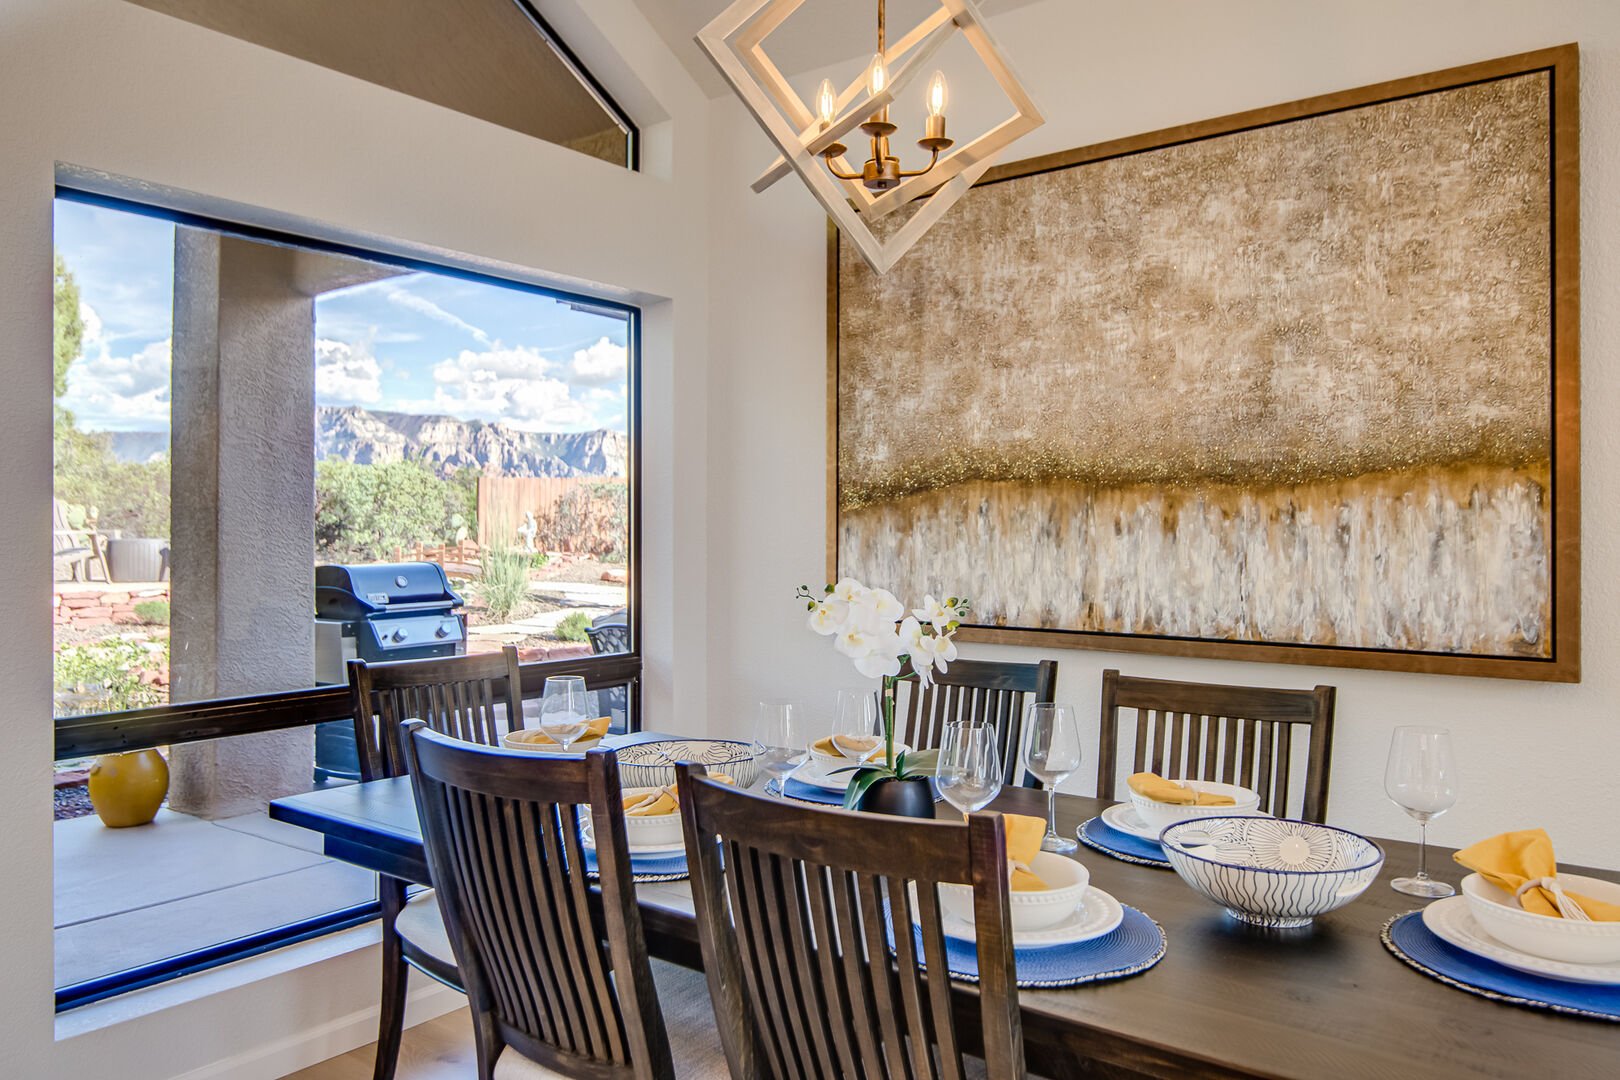 Enjoy the Mountain Views from the Dining Area!